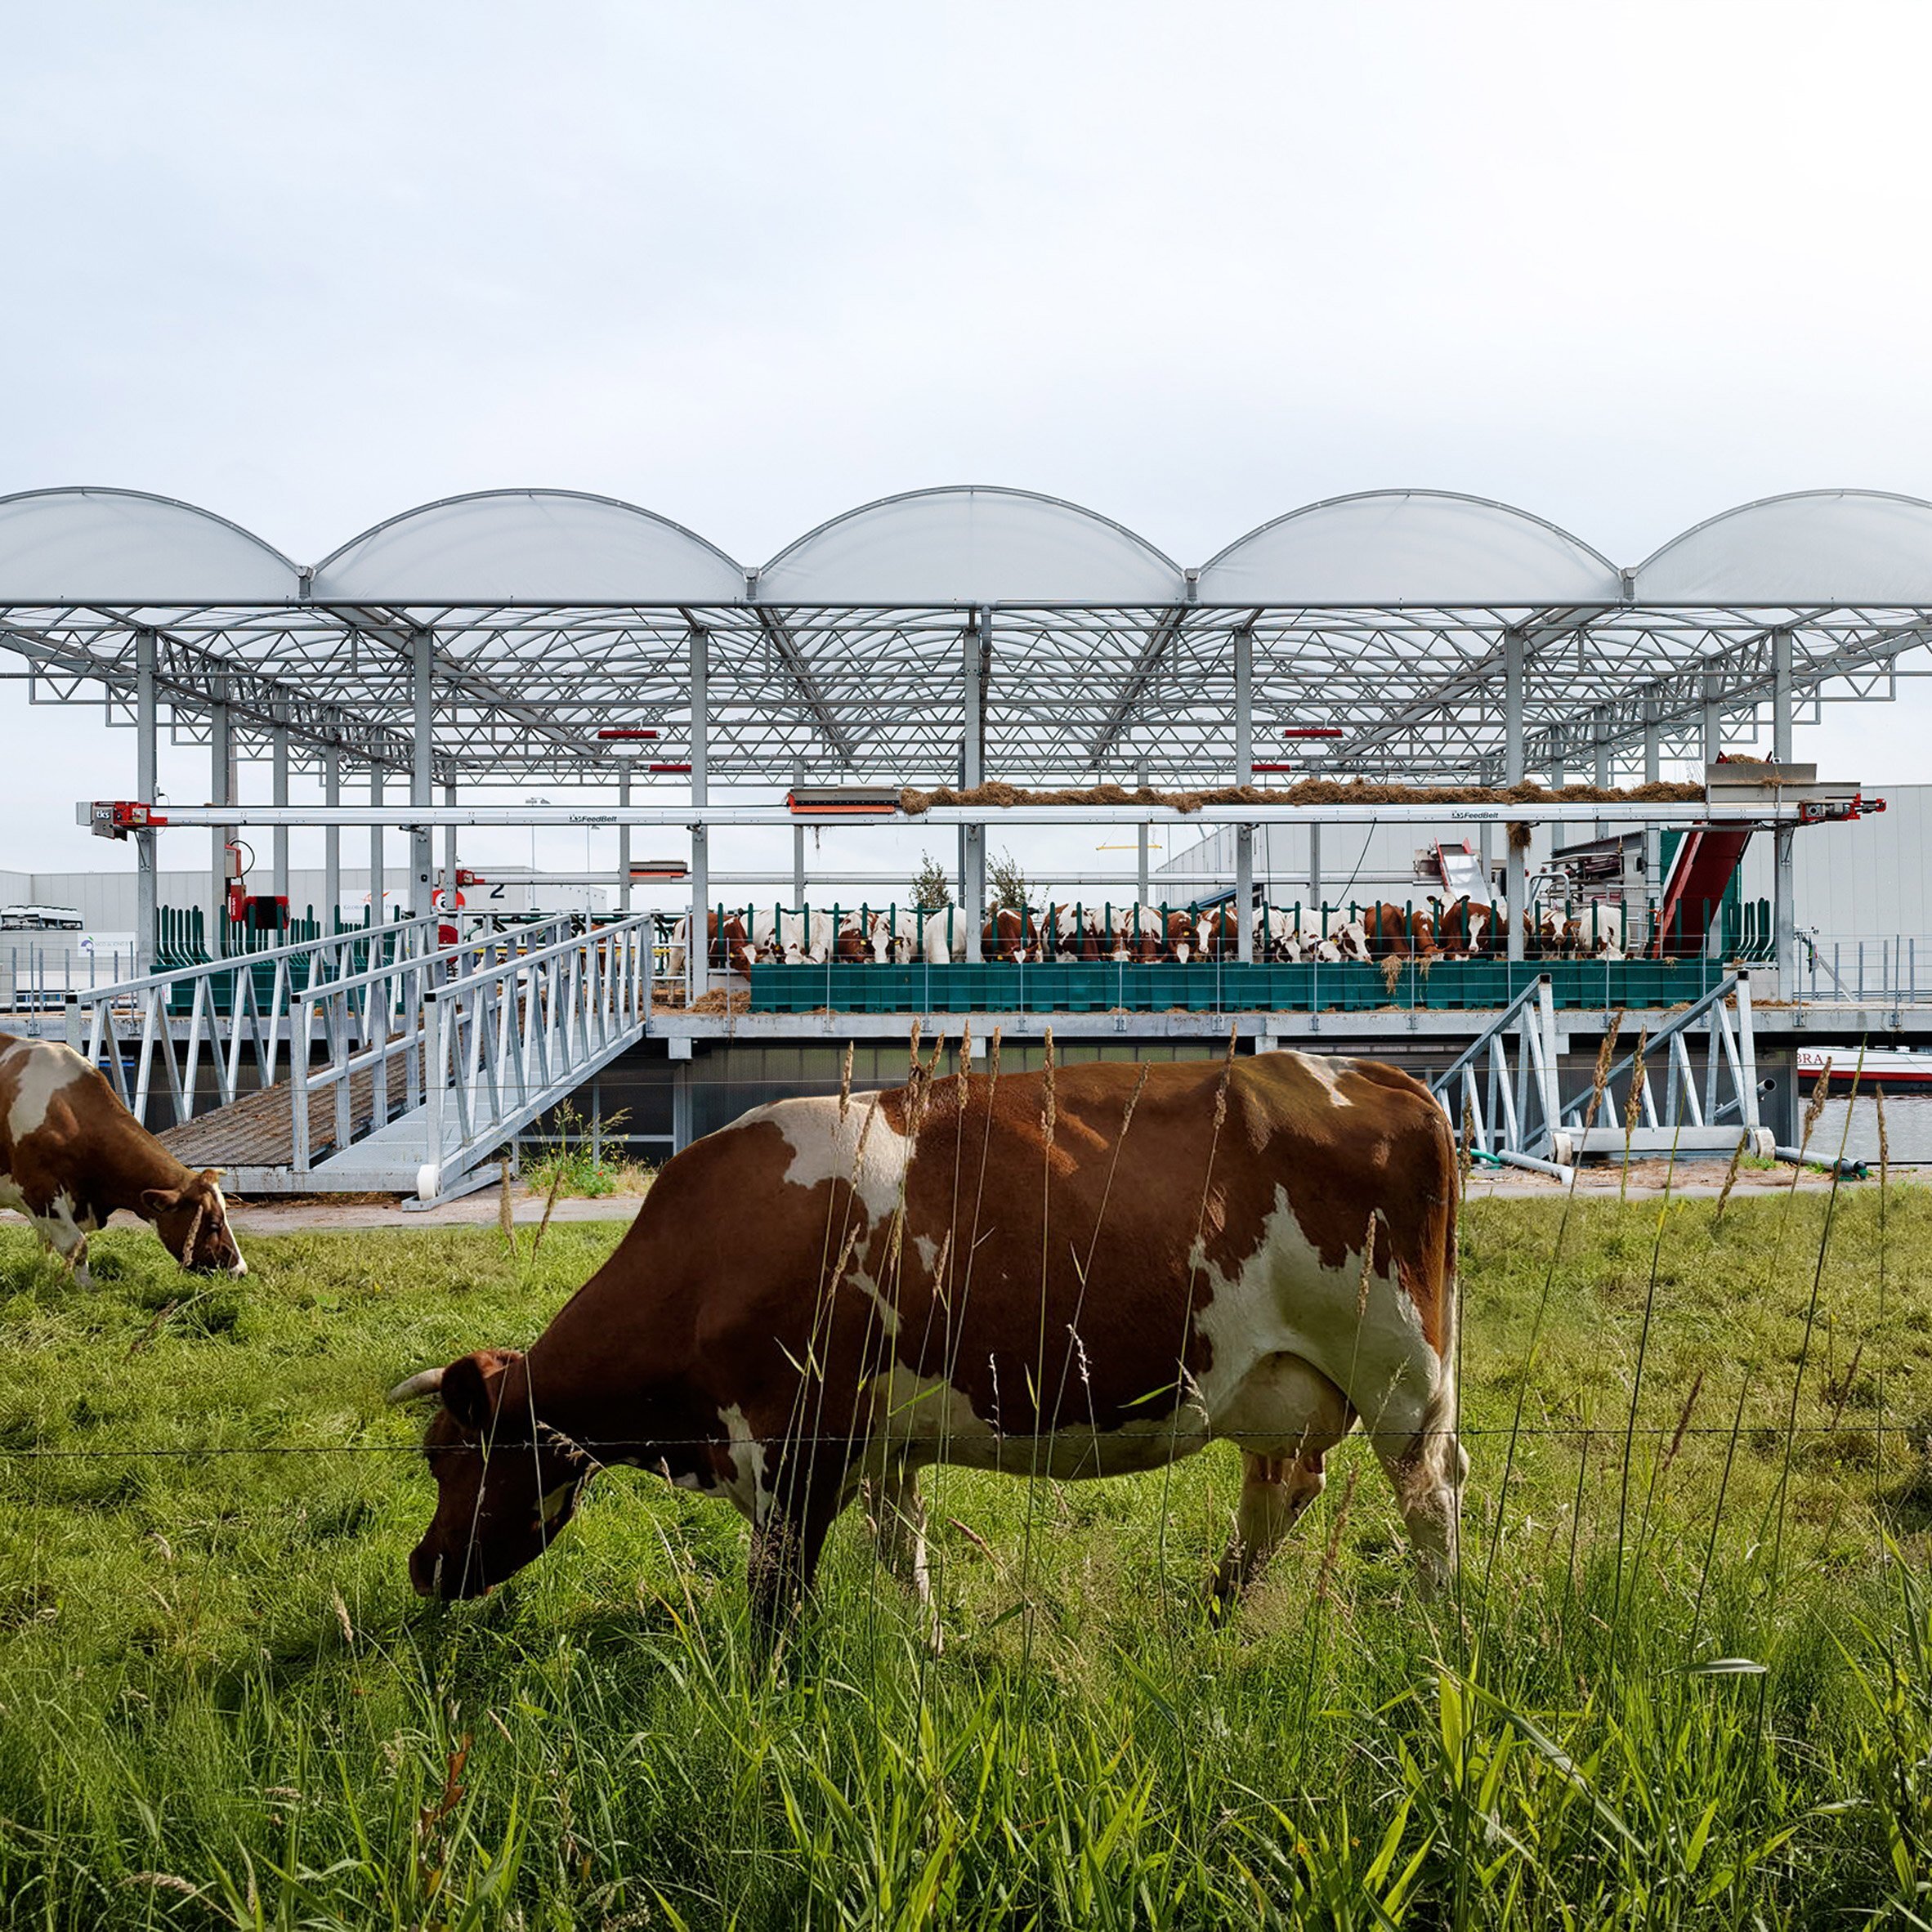 Image sourced from the Floating Farm Rotterdam, and designed by the architecture studio Goldsmith